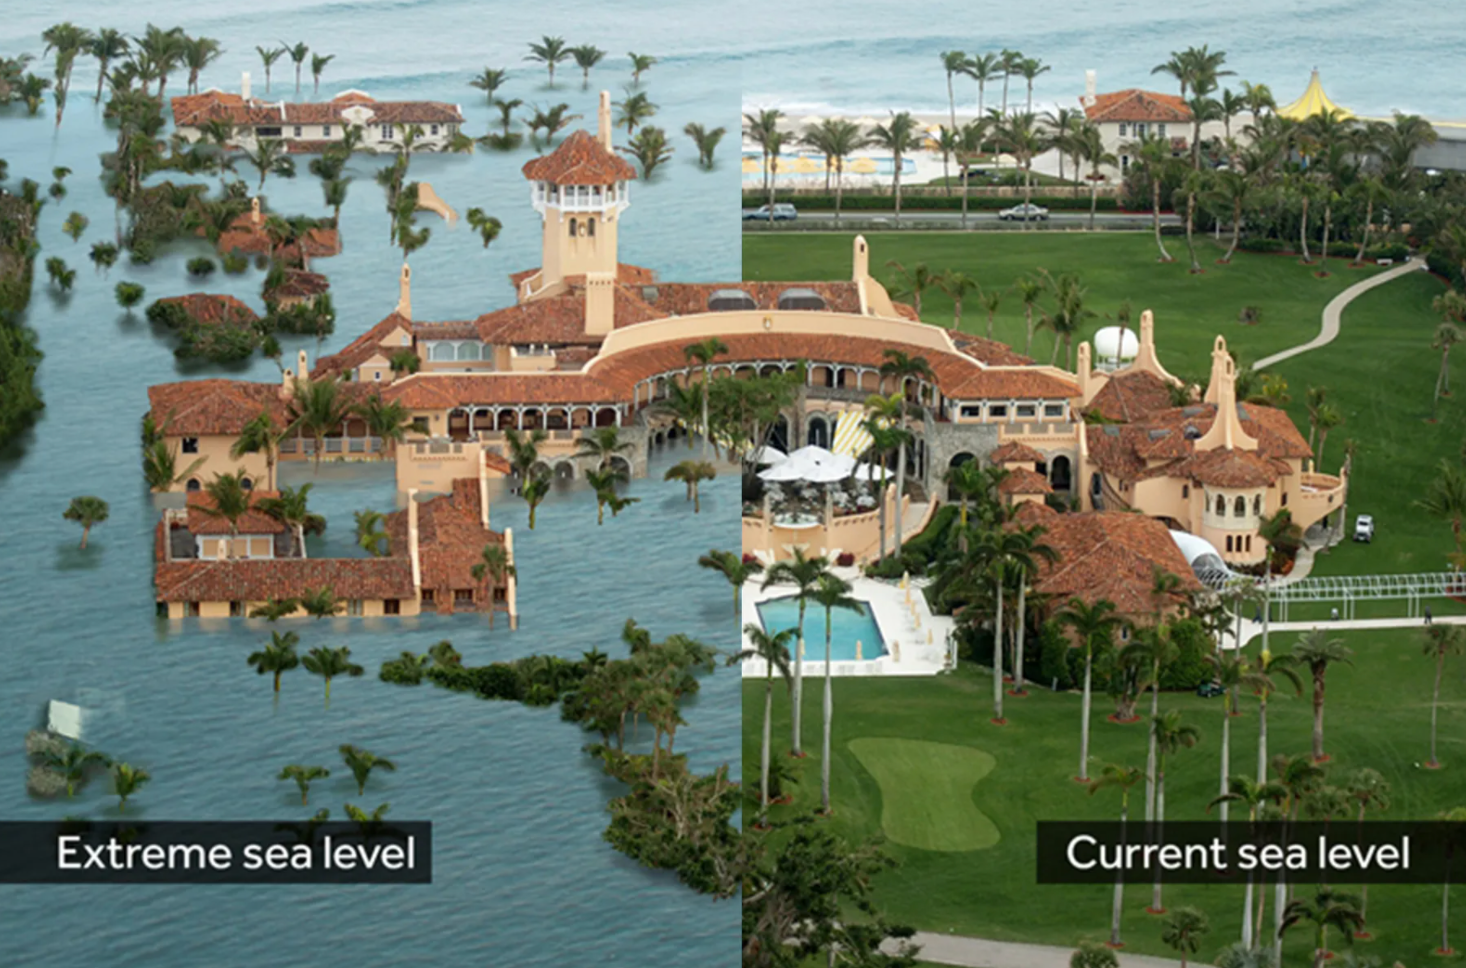 An artist’s impression of former president Donald Trump’s Mar-a-Lago by 2100 under the “doomsday scenario” of 10-foot sea level rise. Even in more conservative ranges, the private club is still impacted